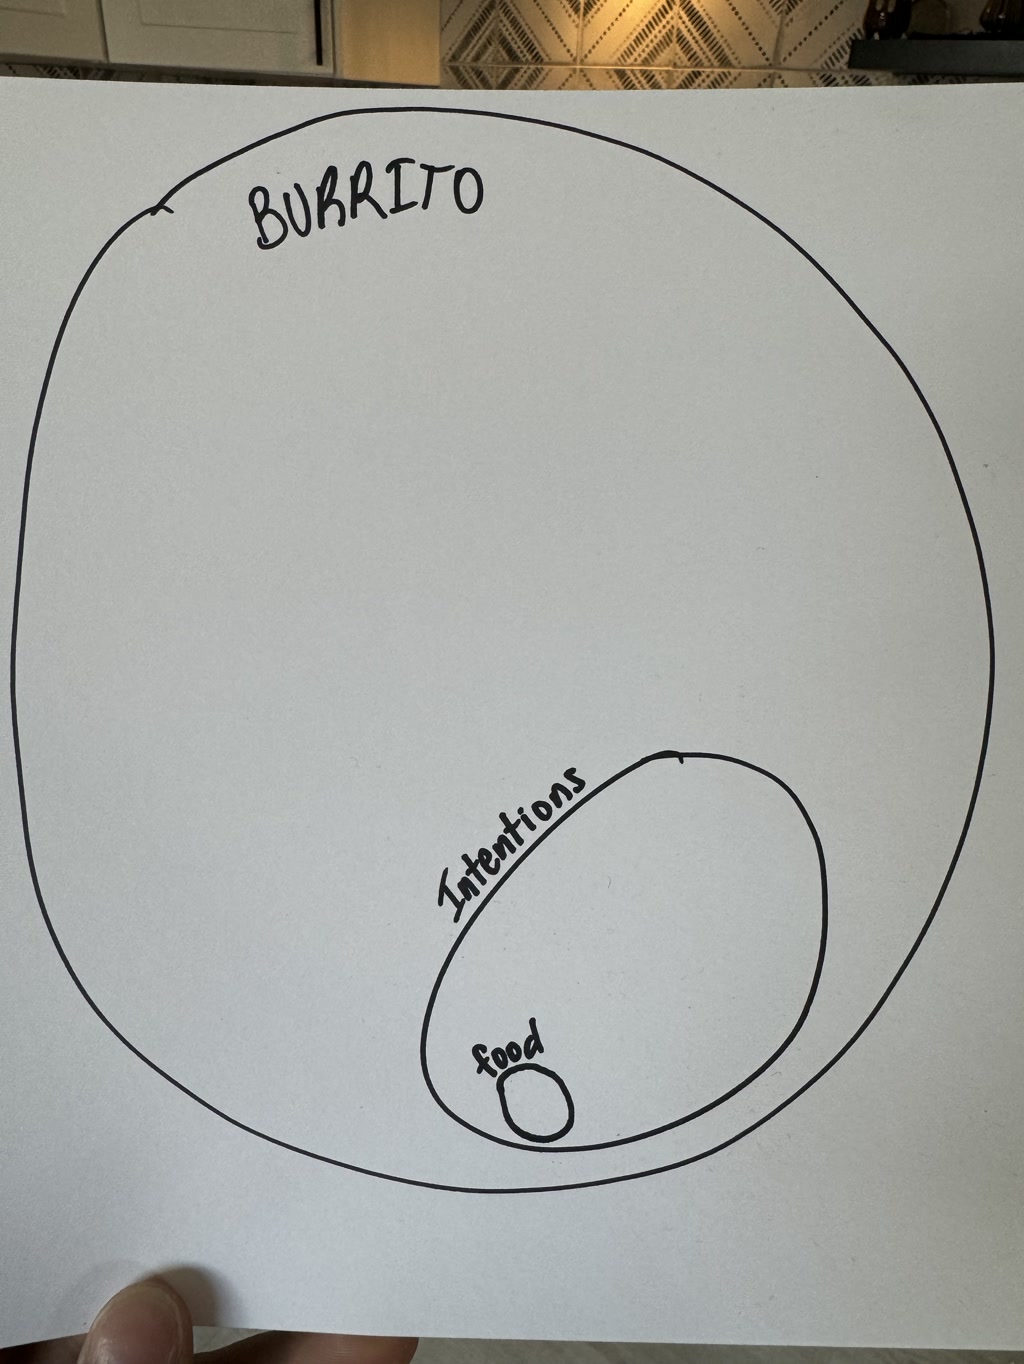 A hand-drawn diagram on a piece of white paper shows two concentric shapes: a large oval labeled 'BURRITO' and a smaller oval within it labeled 'Intentions,' with a tiny circle inside the smaller oval labeled 'food'. The overall diagram suggests a simplistic representation of a burrito, its intended purpose and contents.